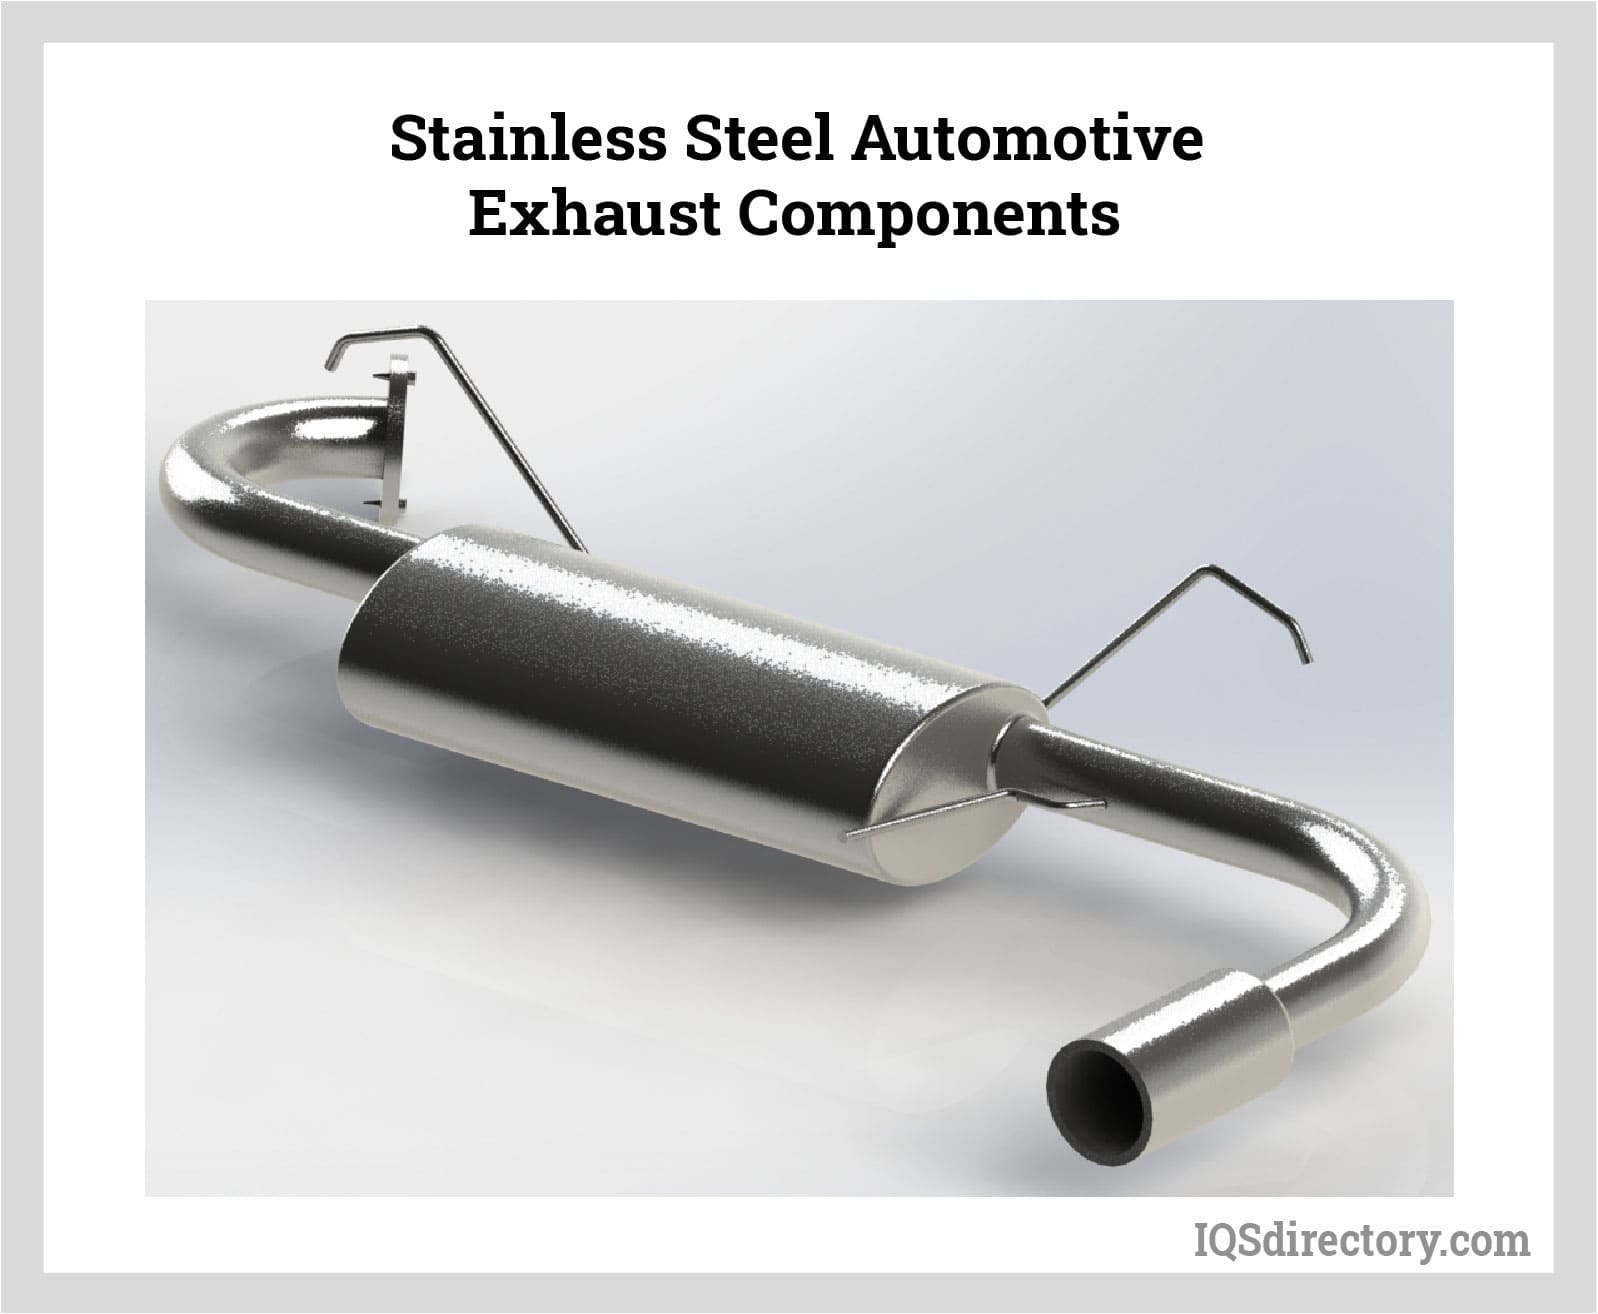 Stainless Steel Automotive Exhaust Components